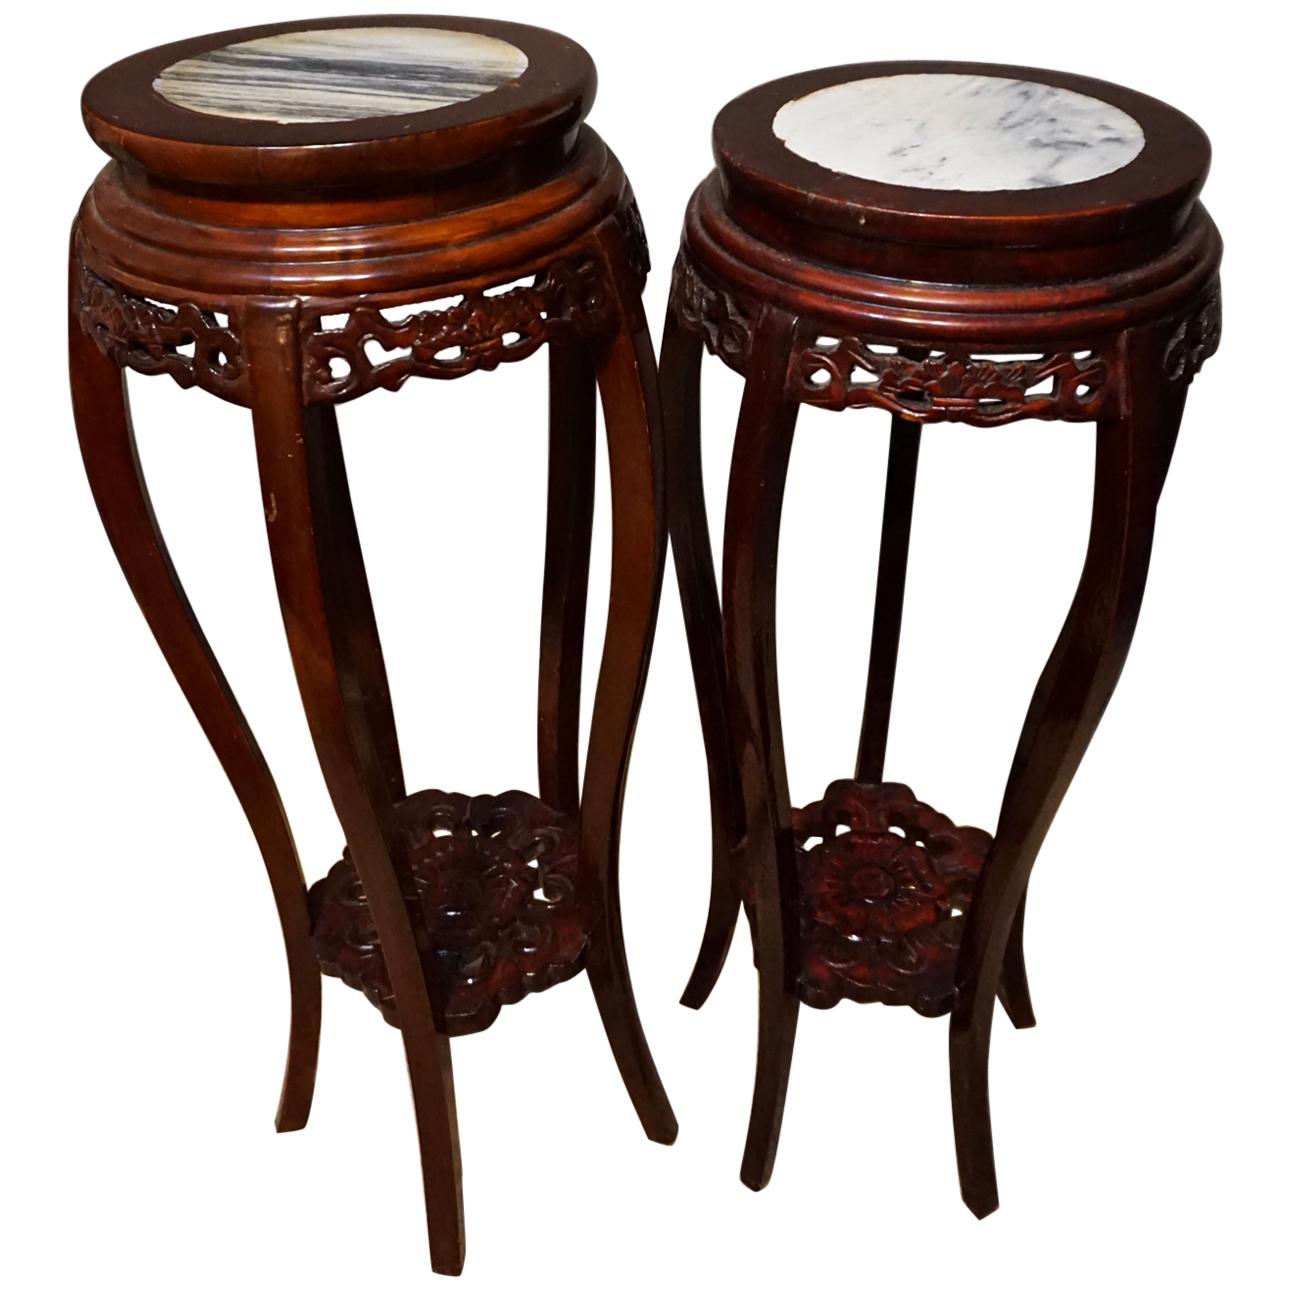 Pair of Antique Chinese Mahogany and Marble Carved Plant Stands